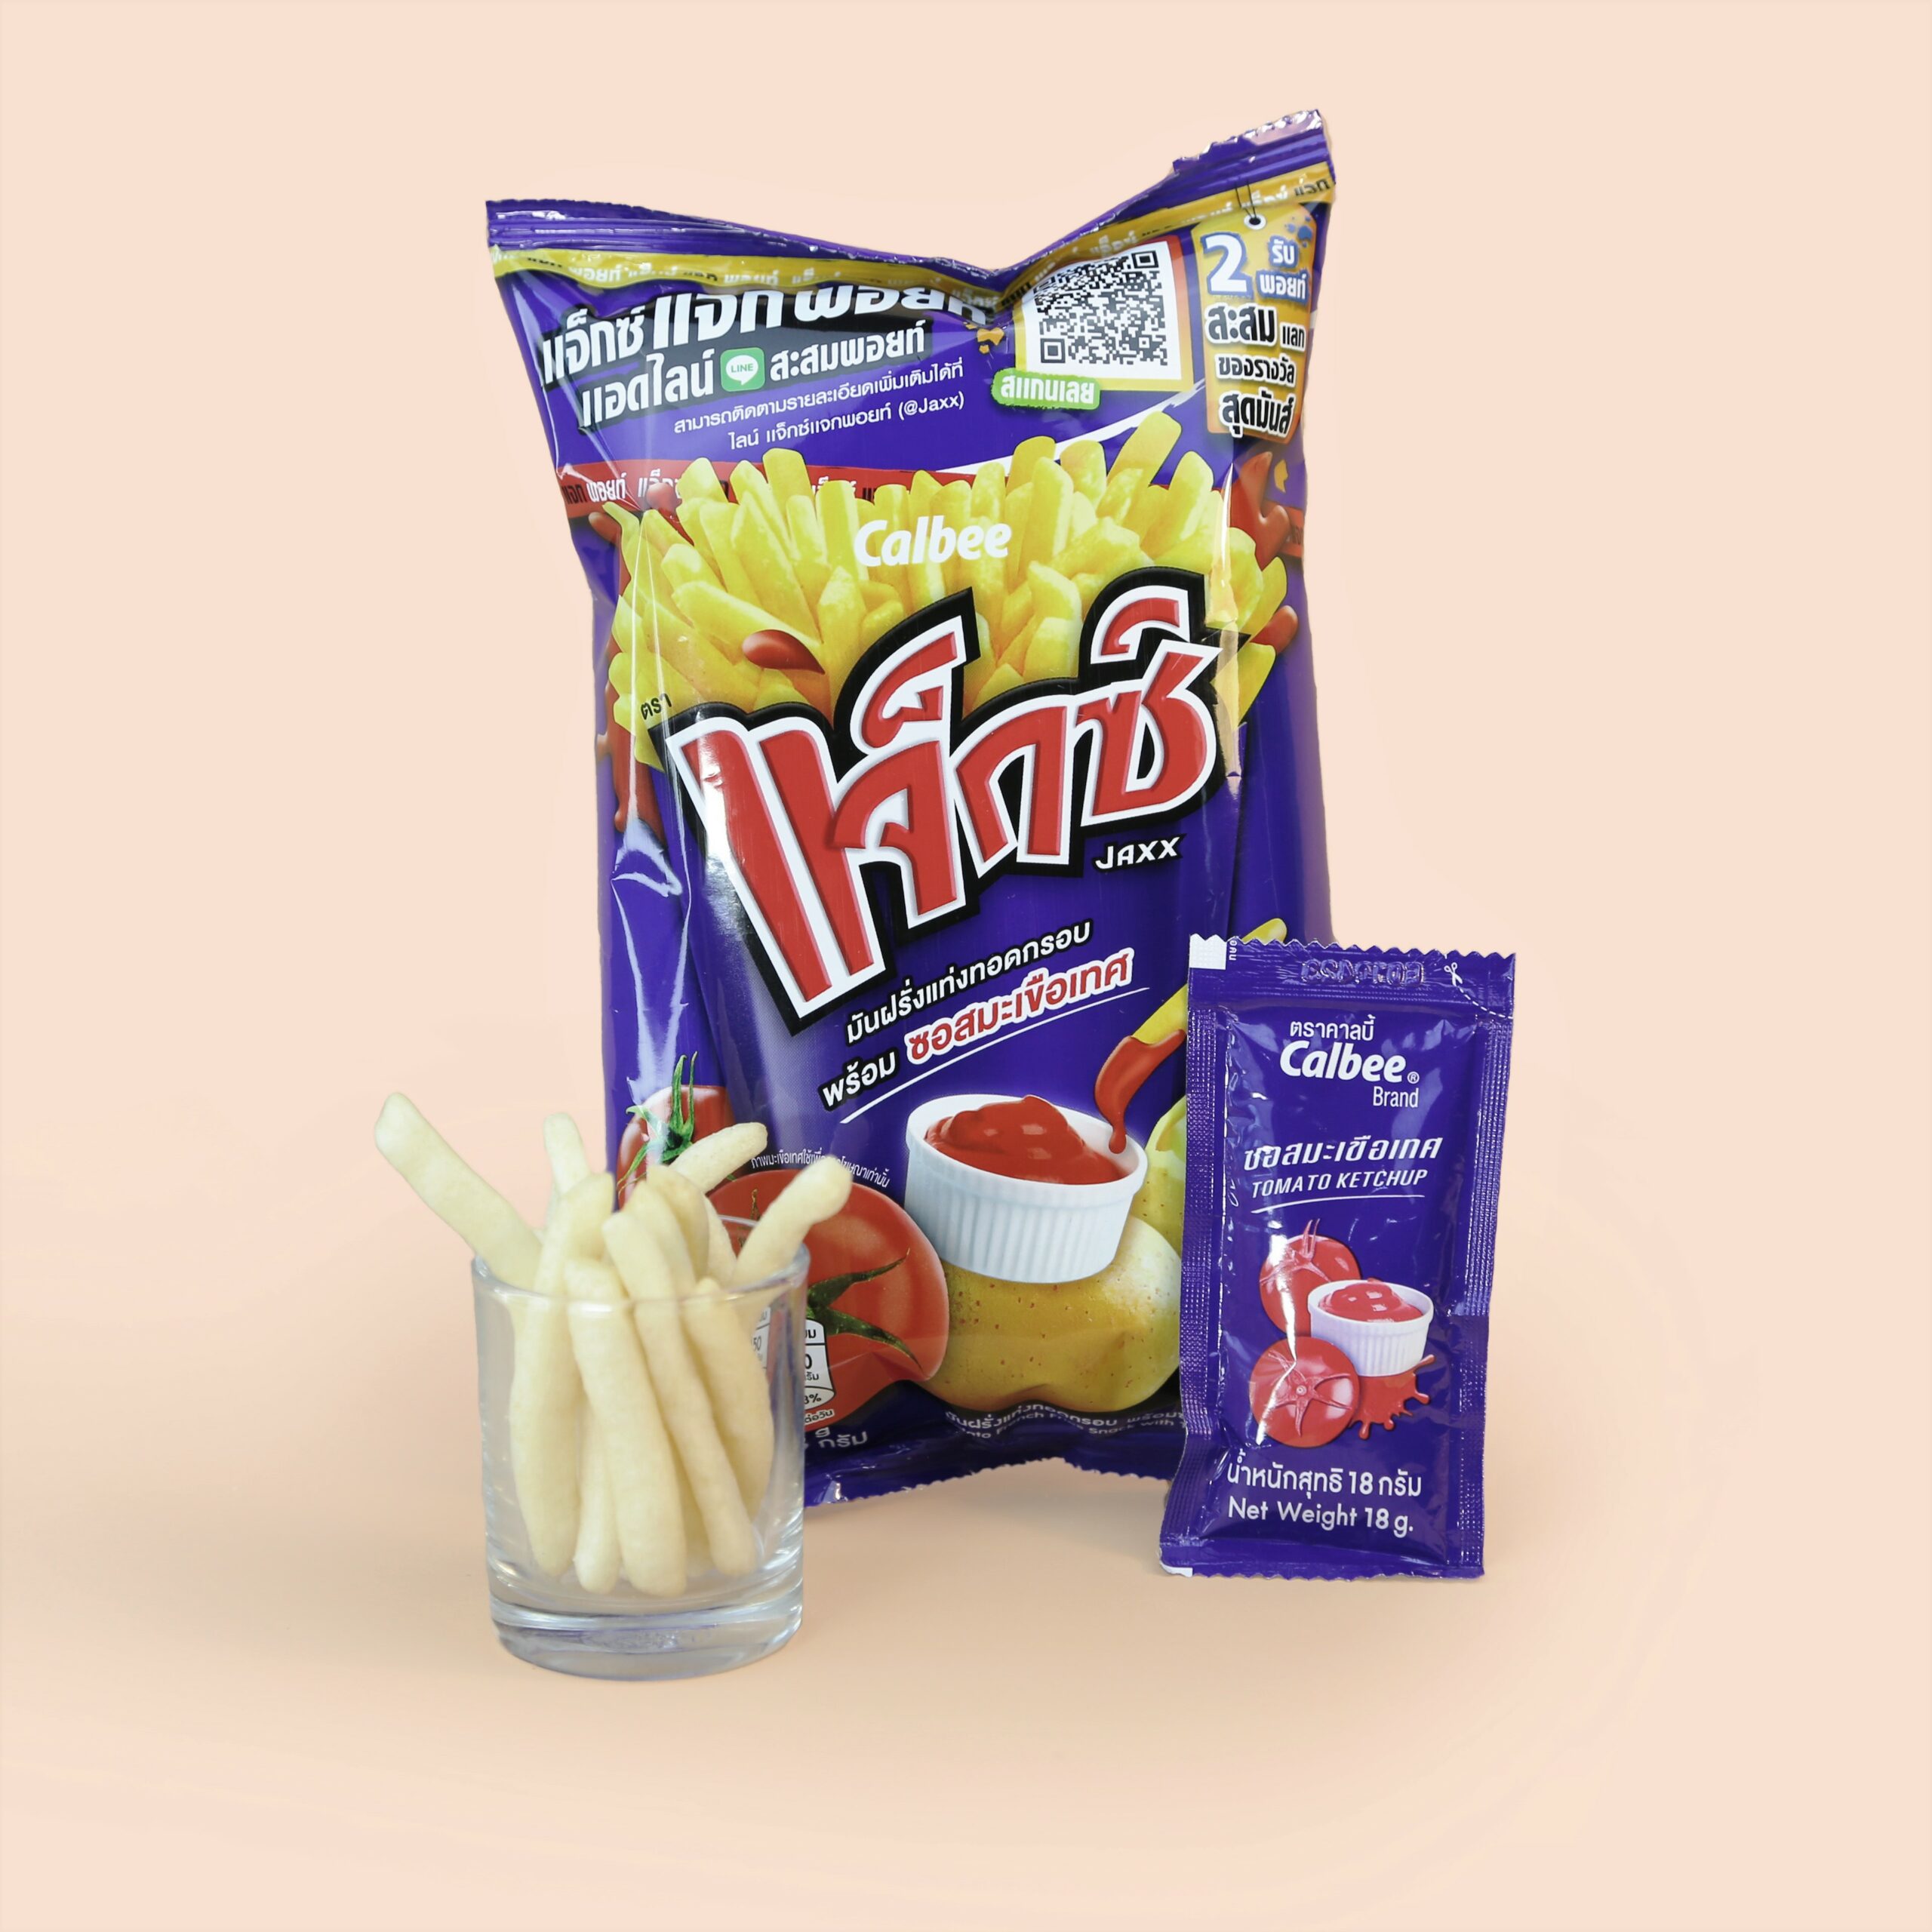 Calbee Jack's potato chips with ketchup. In the shape of french fries and comes with ketchup in the bag. Made in Thailand, a popular Thai snack